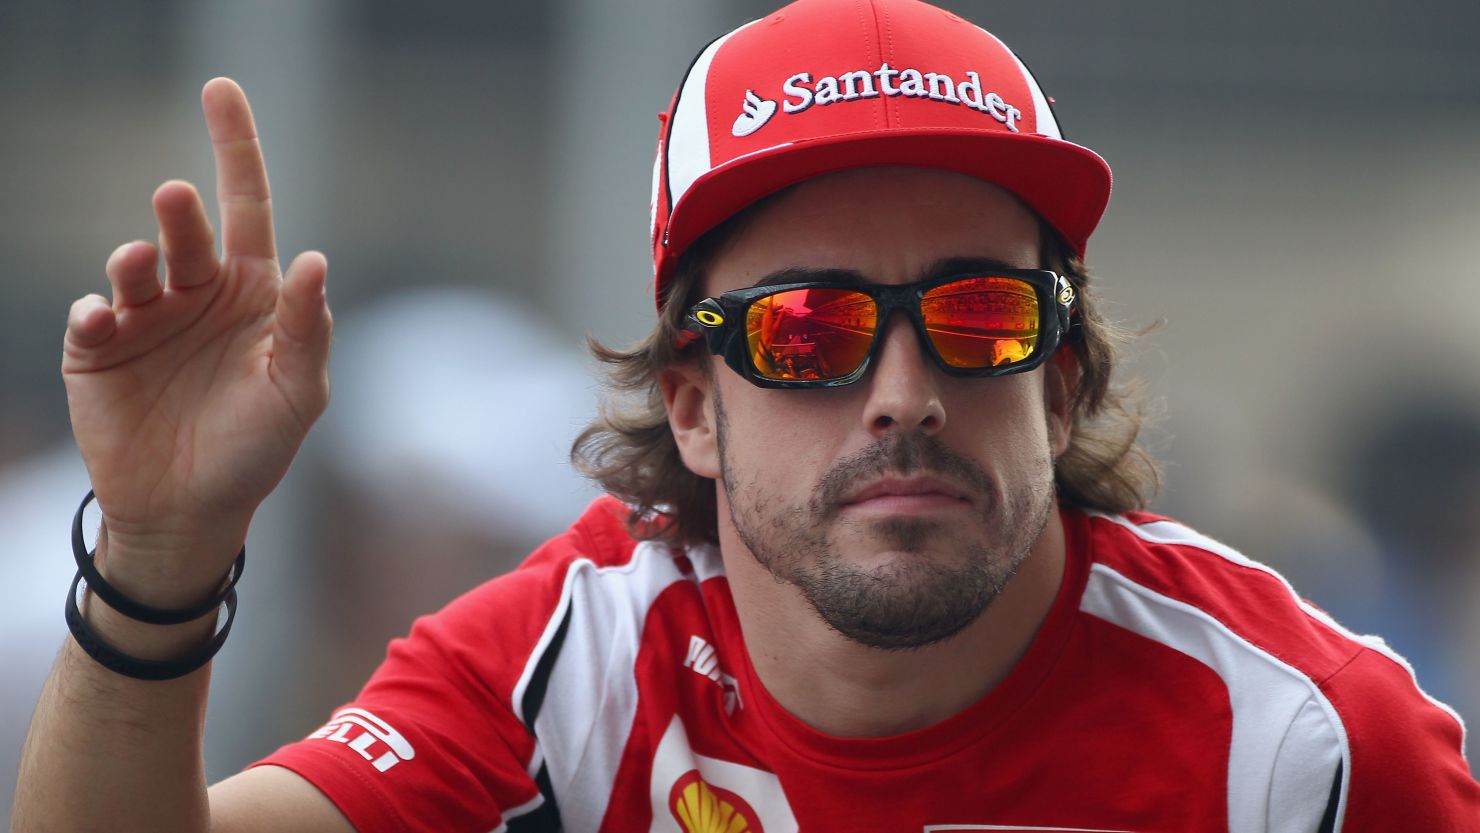 Fernando Alonso has won two Formula One world titles, in 2005 and 2006.